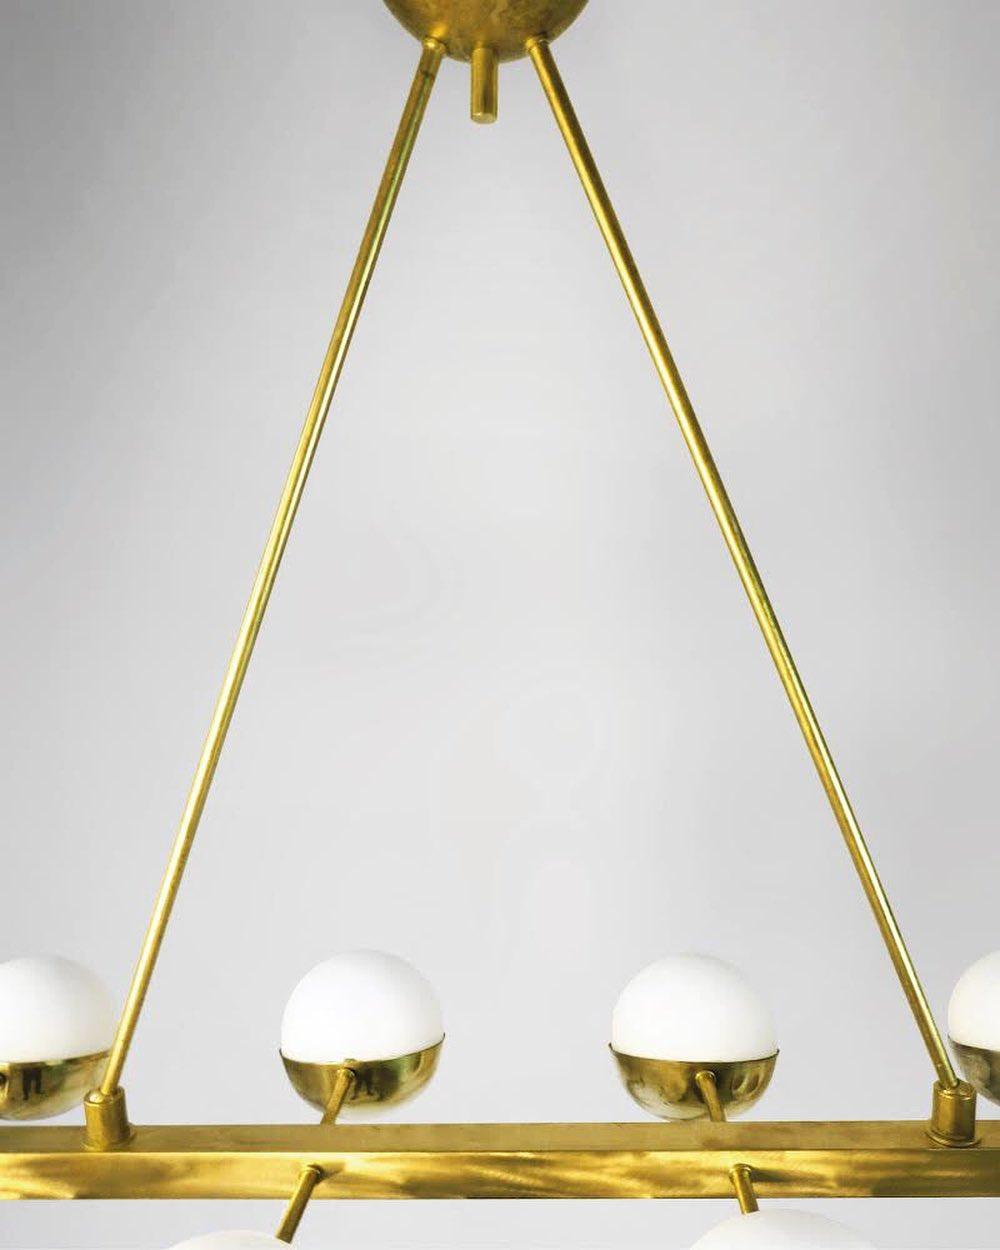 Italian Mid Century Style Brass Chandelier with 12 glass globe lights In Excellent Condition For Sale In Jersey City, NJ